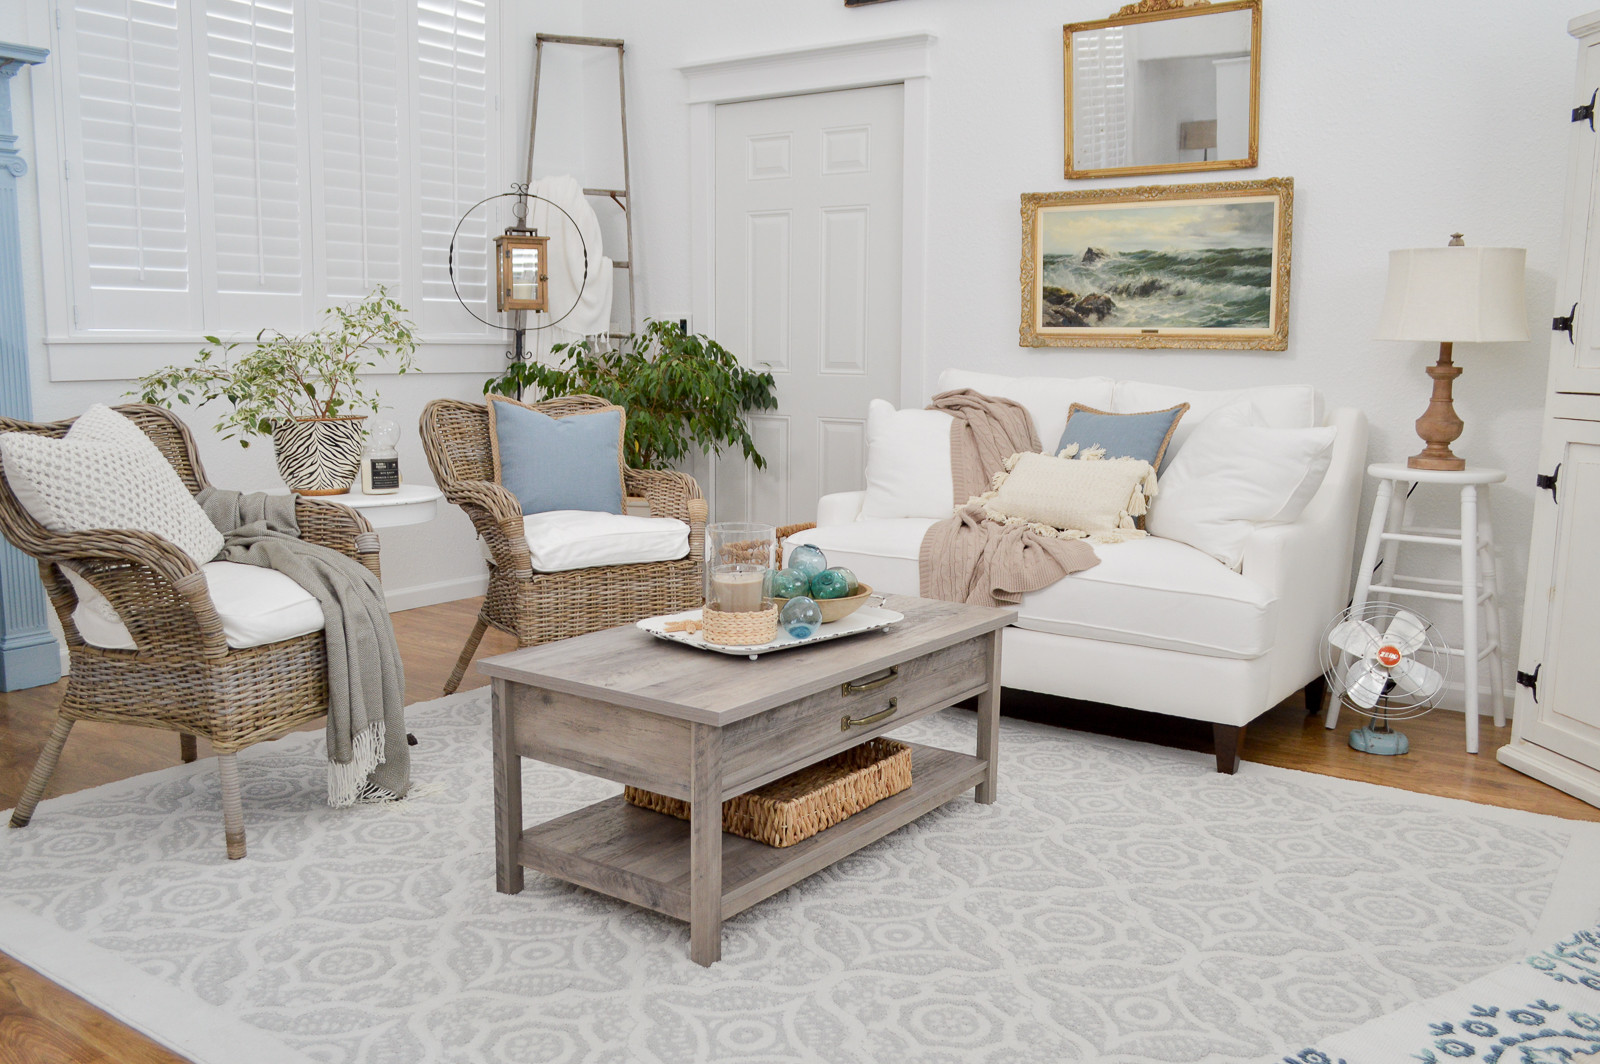 Farmhouse Living Room Chairs
 New Home Decorating Tips and Ideas Fox Hollow Cottage